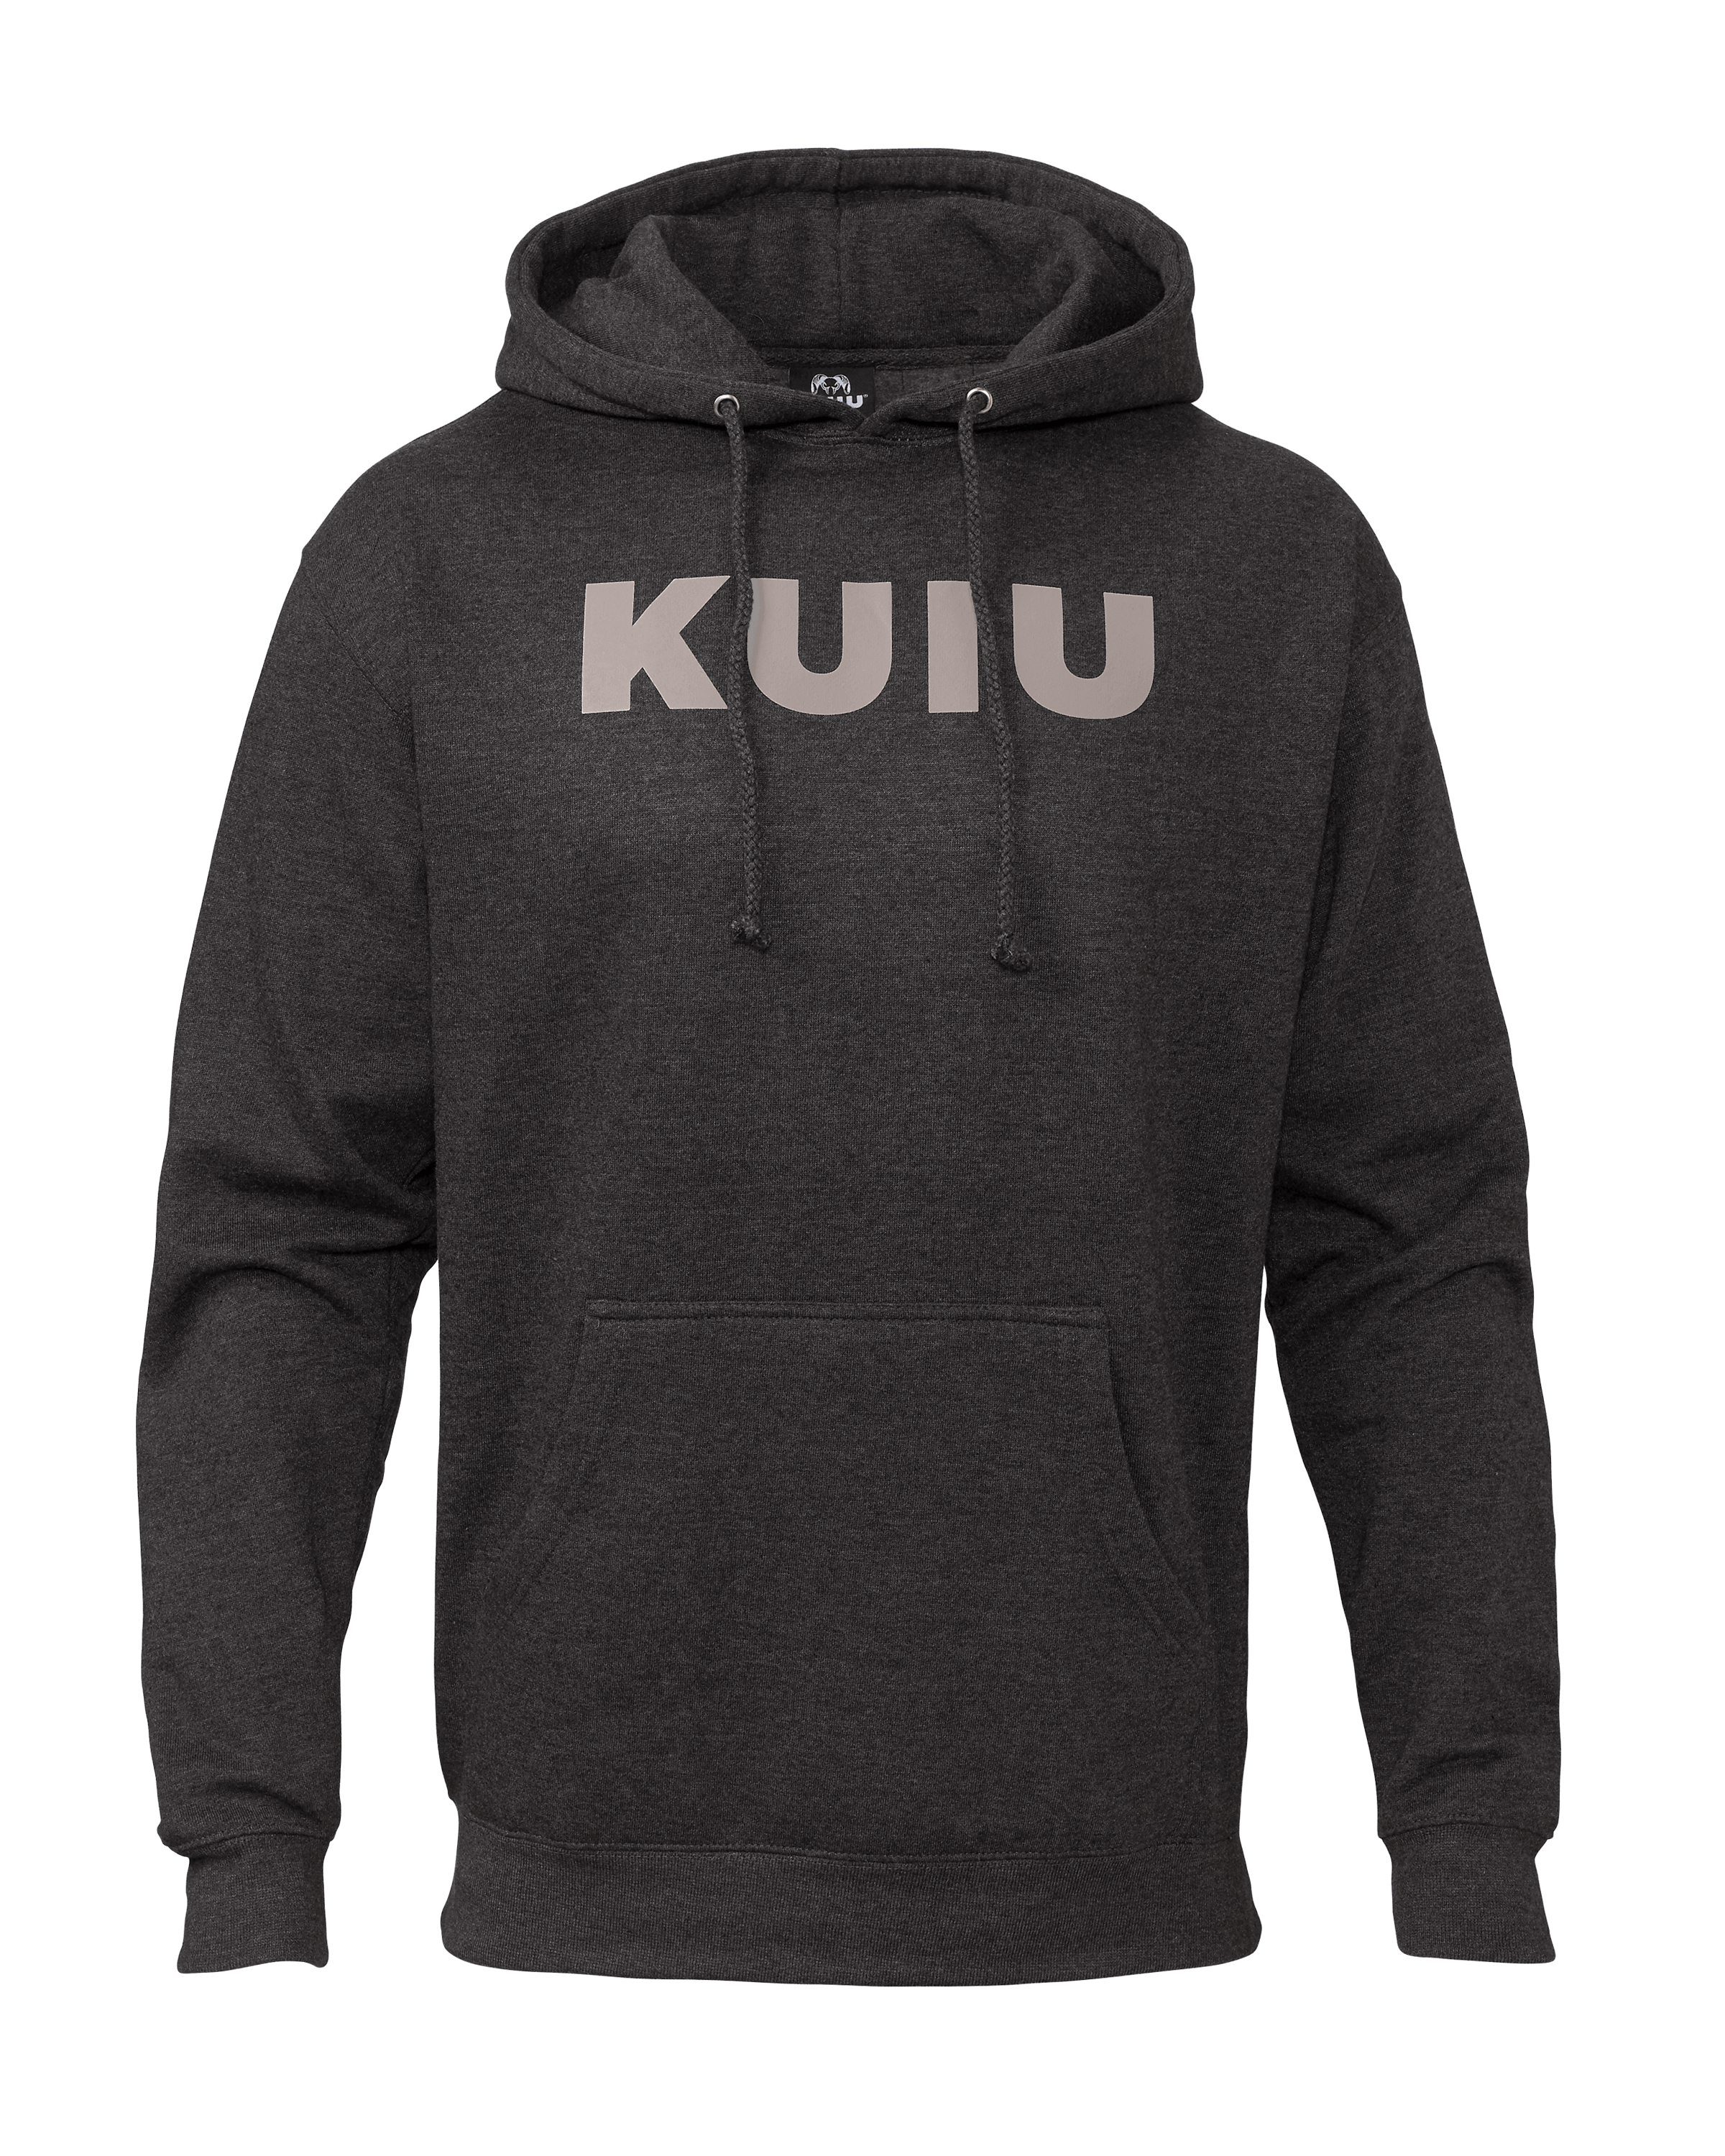 KUIU Outlet Ultralight Sleeve Logo Hunting Hoodie in Charcoal | Size XL